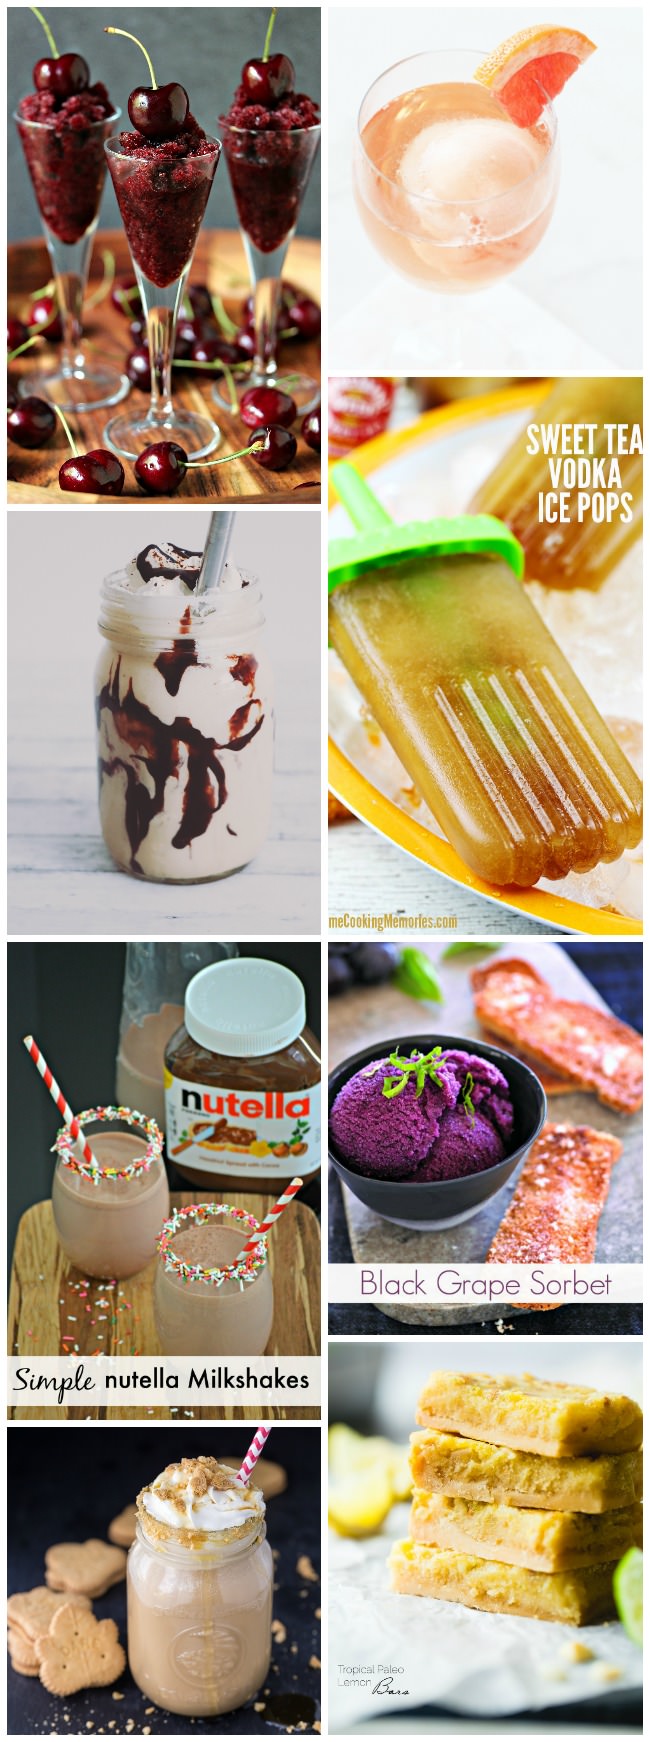 Summer cool down with refreshing milkshakes, popsicles, and ice cream. These 8 Refreshing Summer desserts are a MUST HAVE to keep your cool!